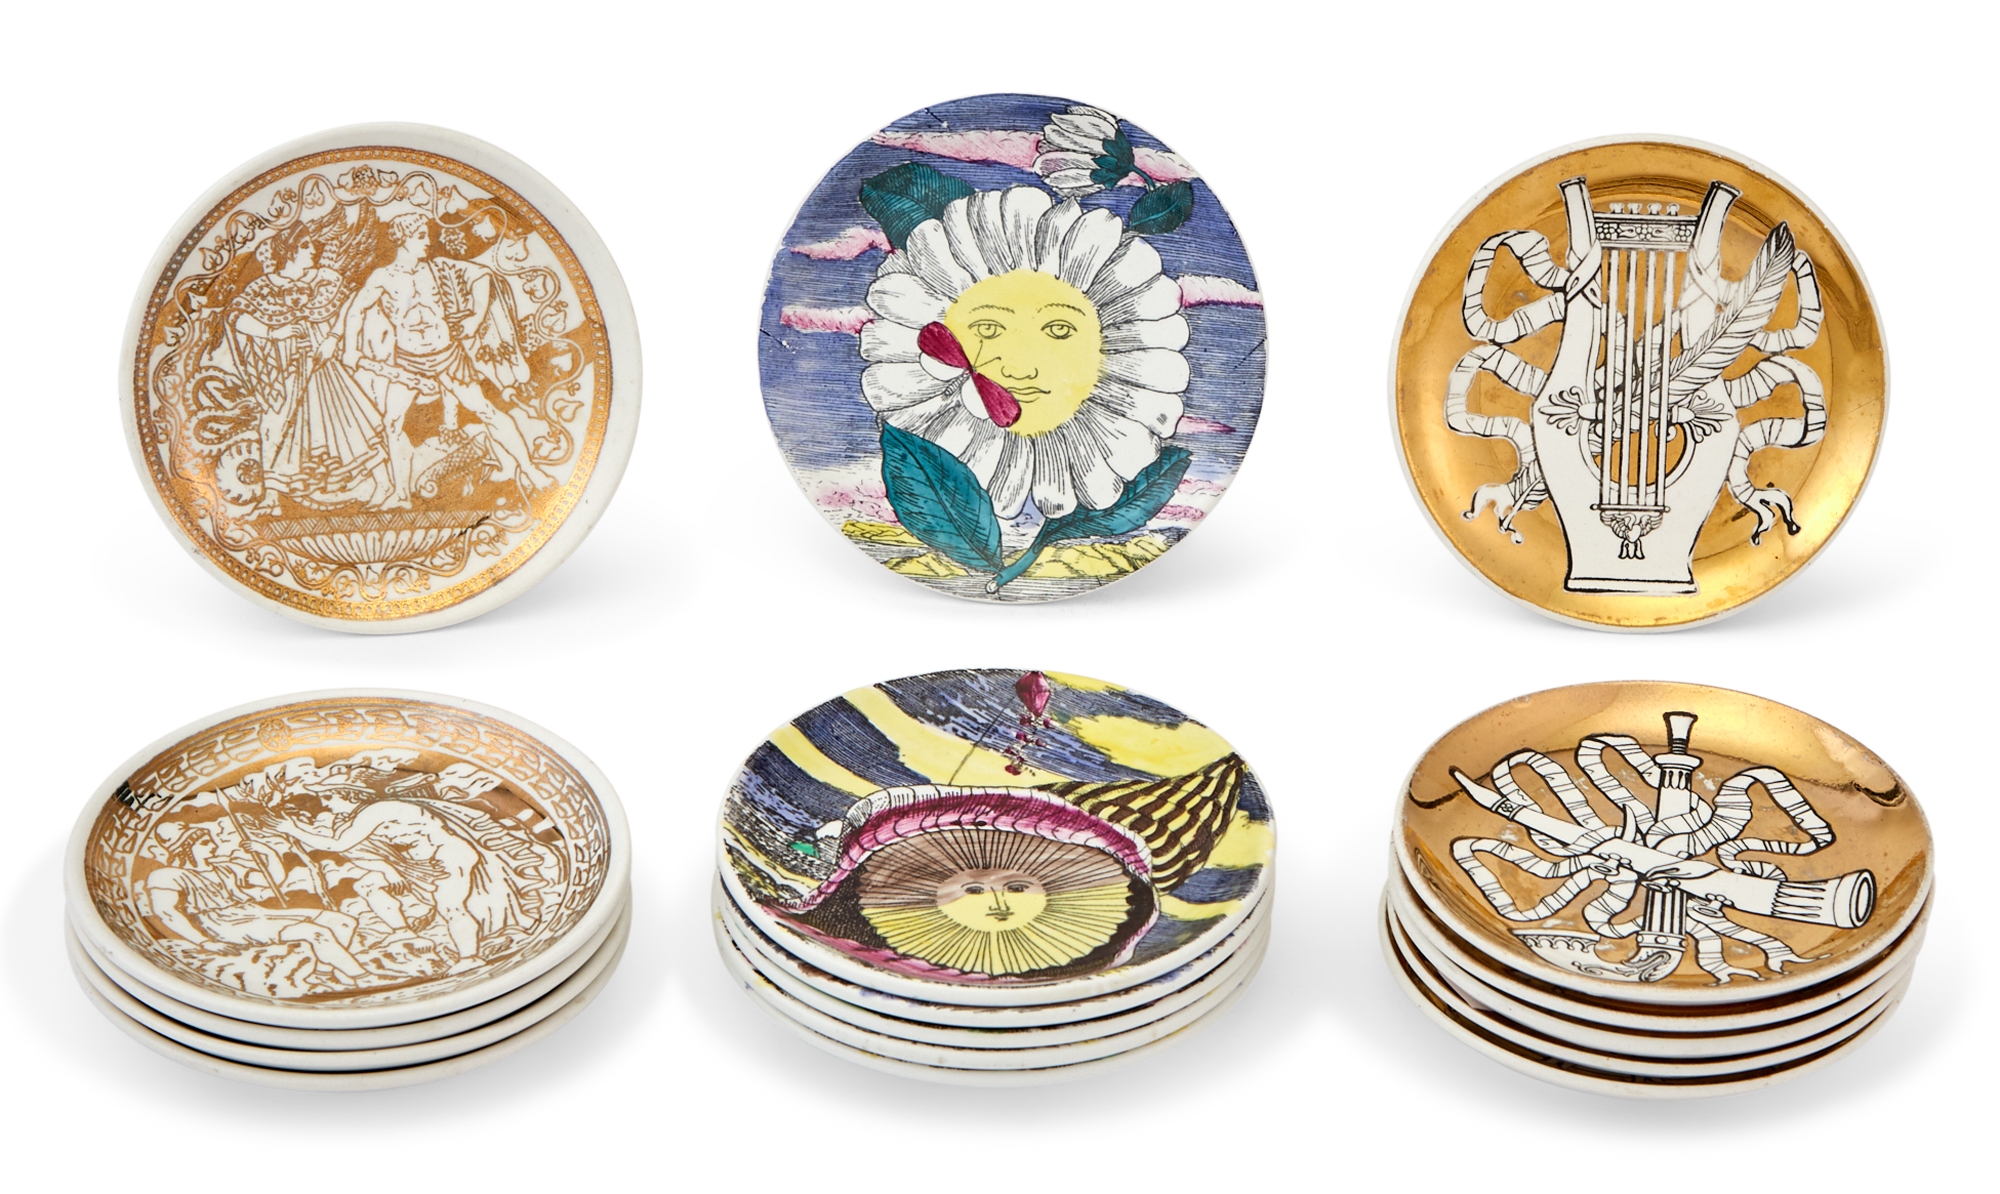 137: PIERO FORNASETTI, Collection of eight Tema e Variazioni plates <  Living Contemporary, 7 October 2021 < Auctions